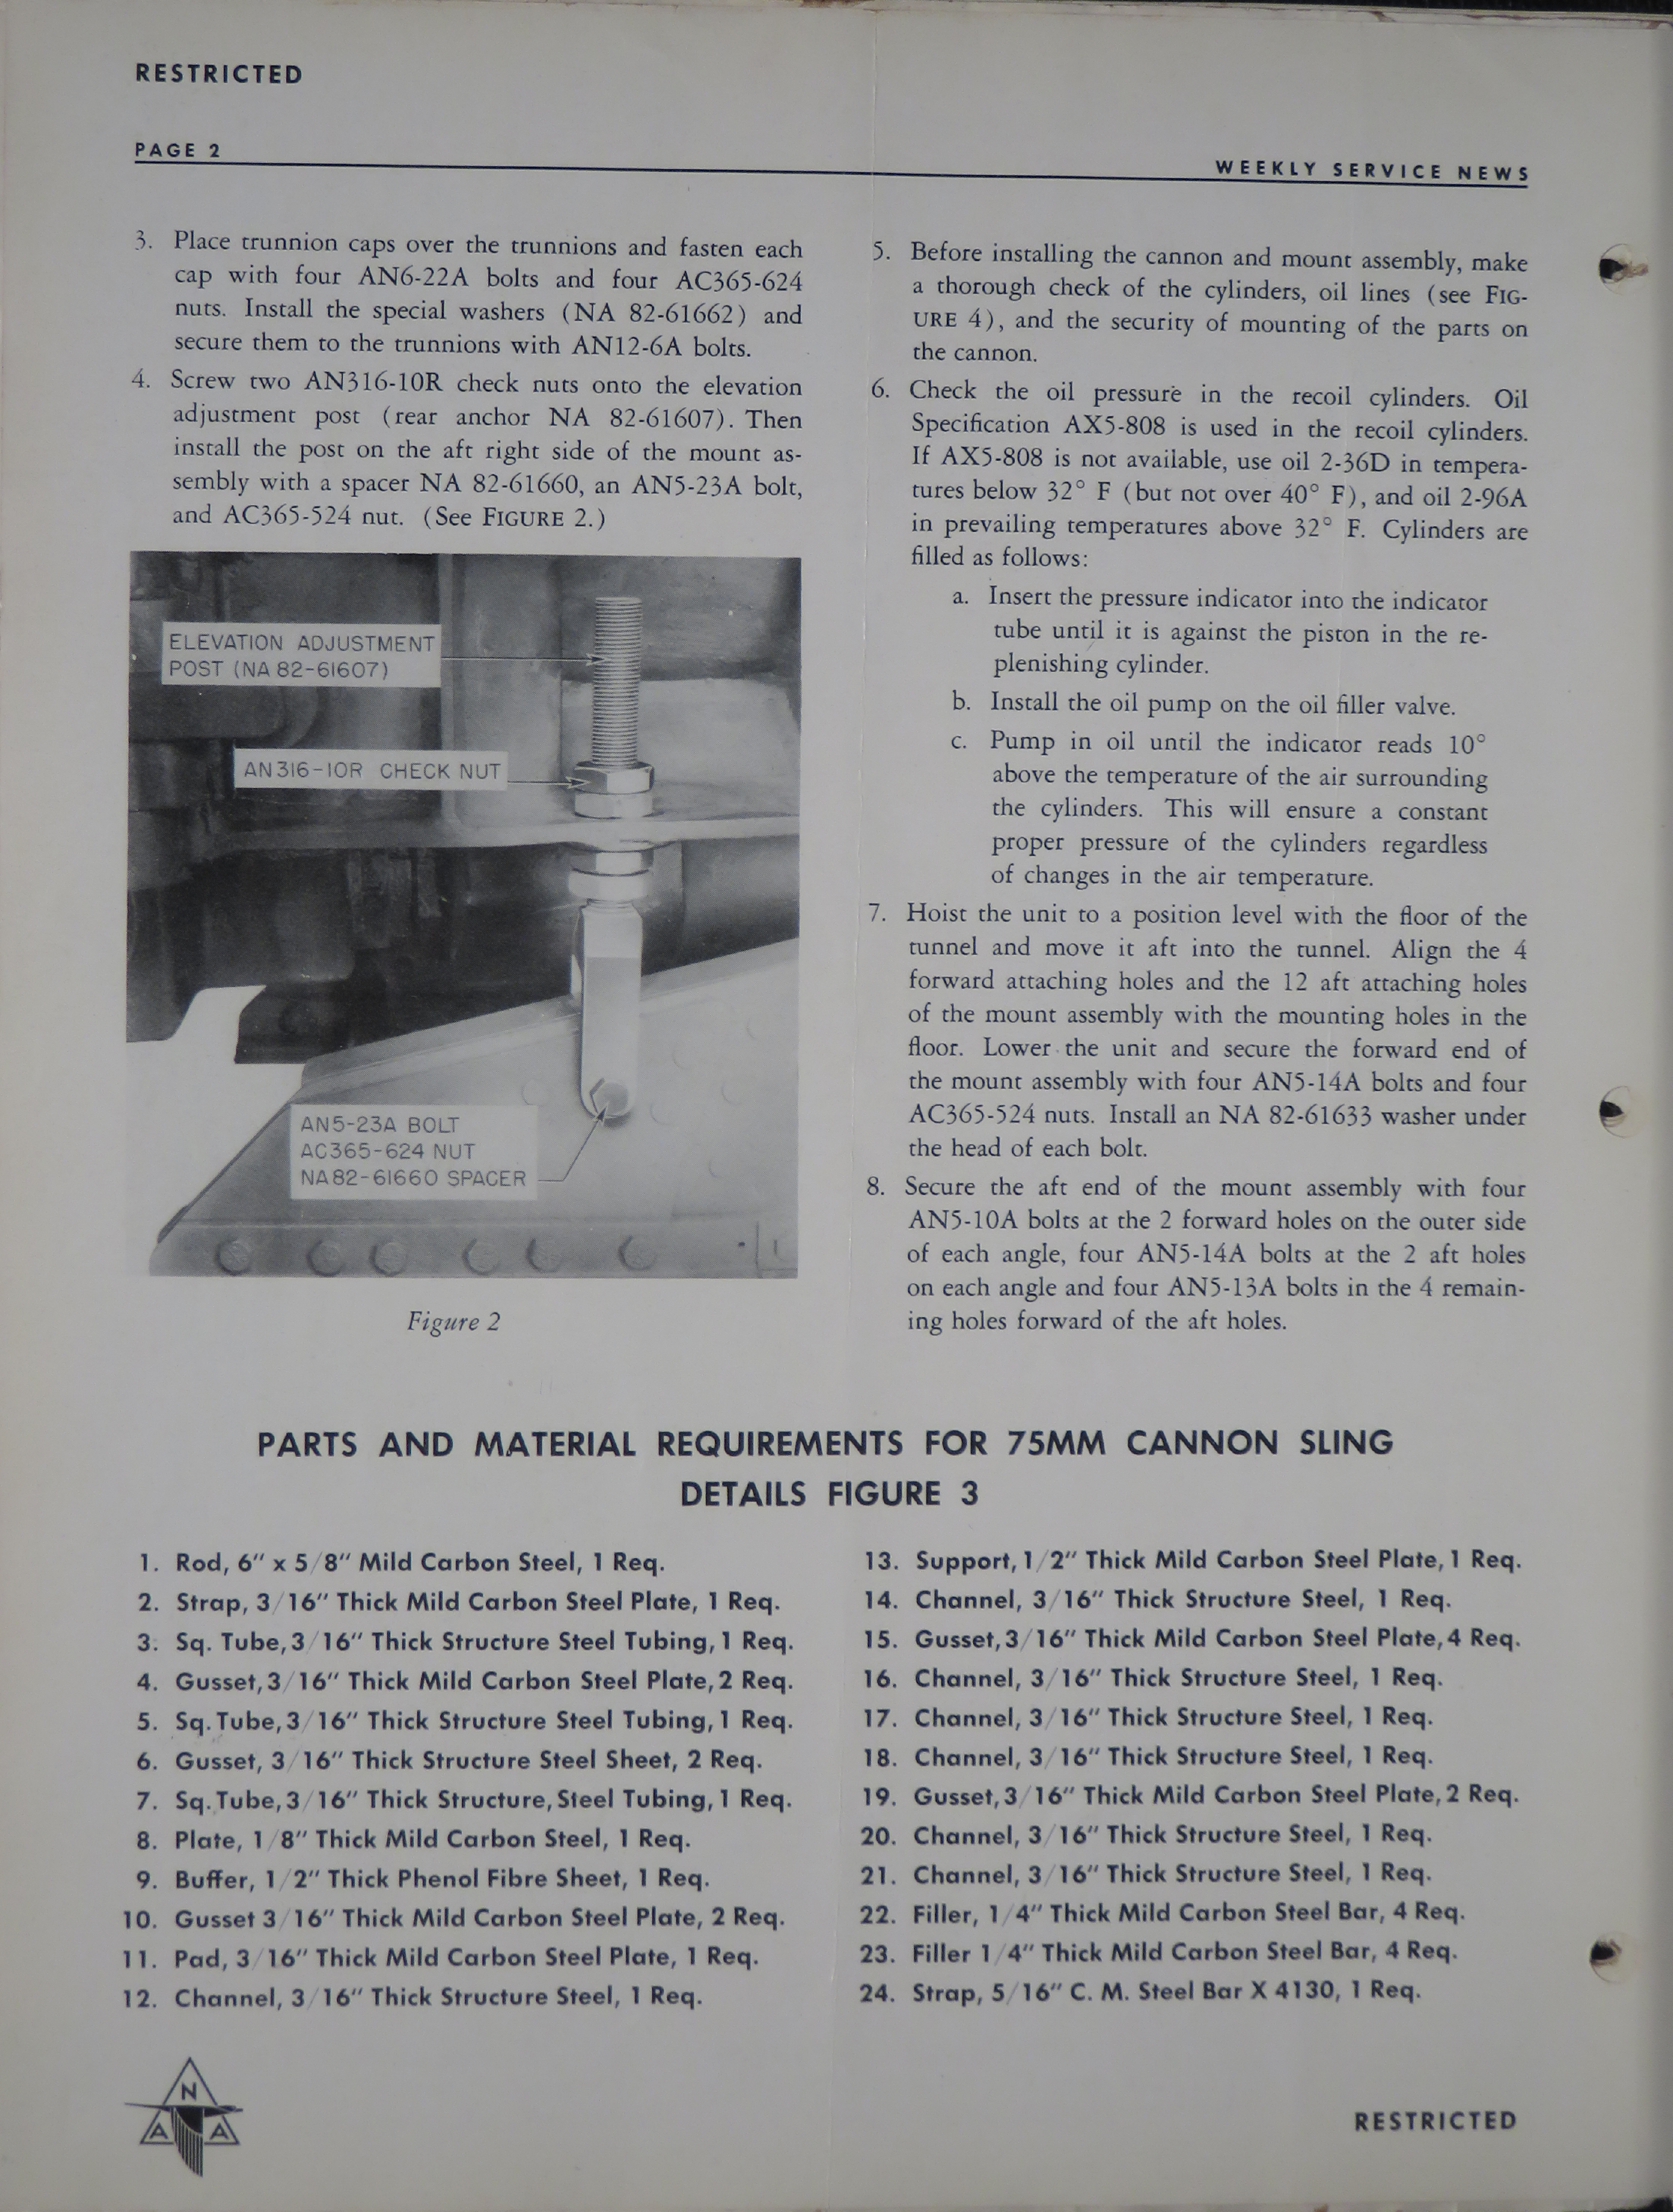 Sample page 2 from AirCorps Library document: Volume 2, No. 8 - Weekly Service News